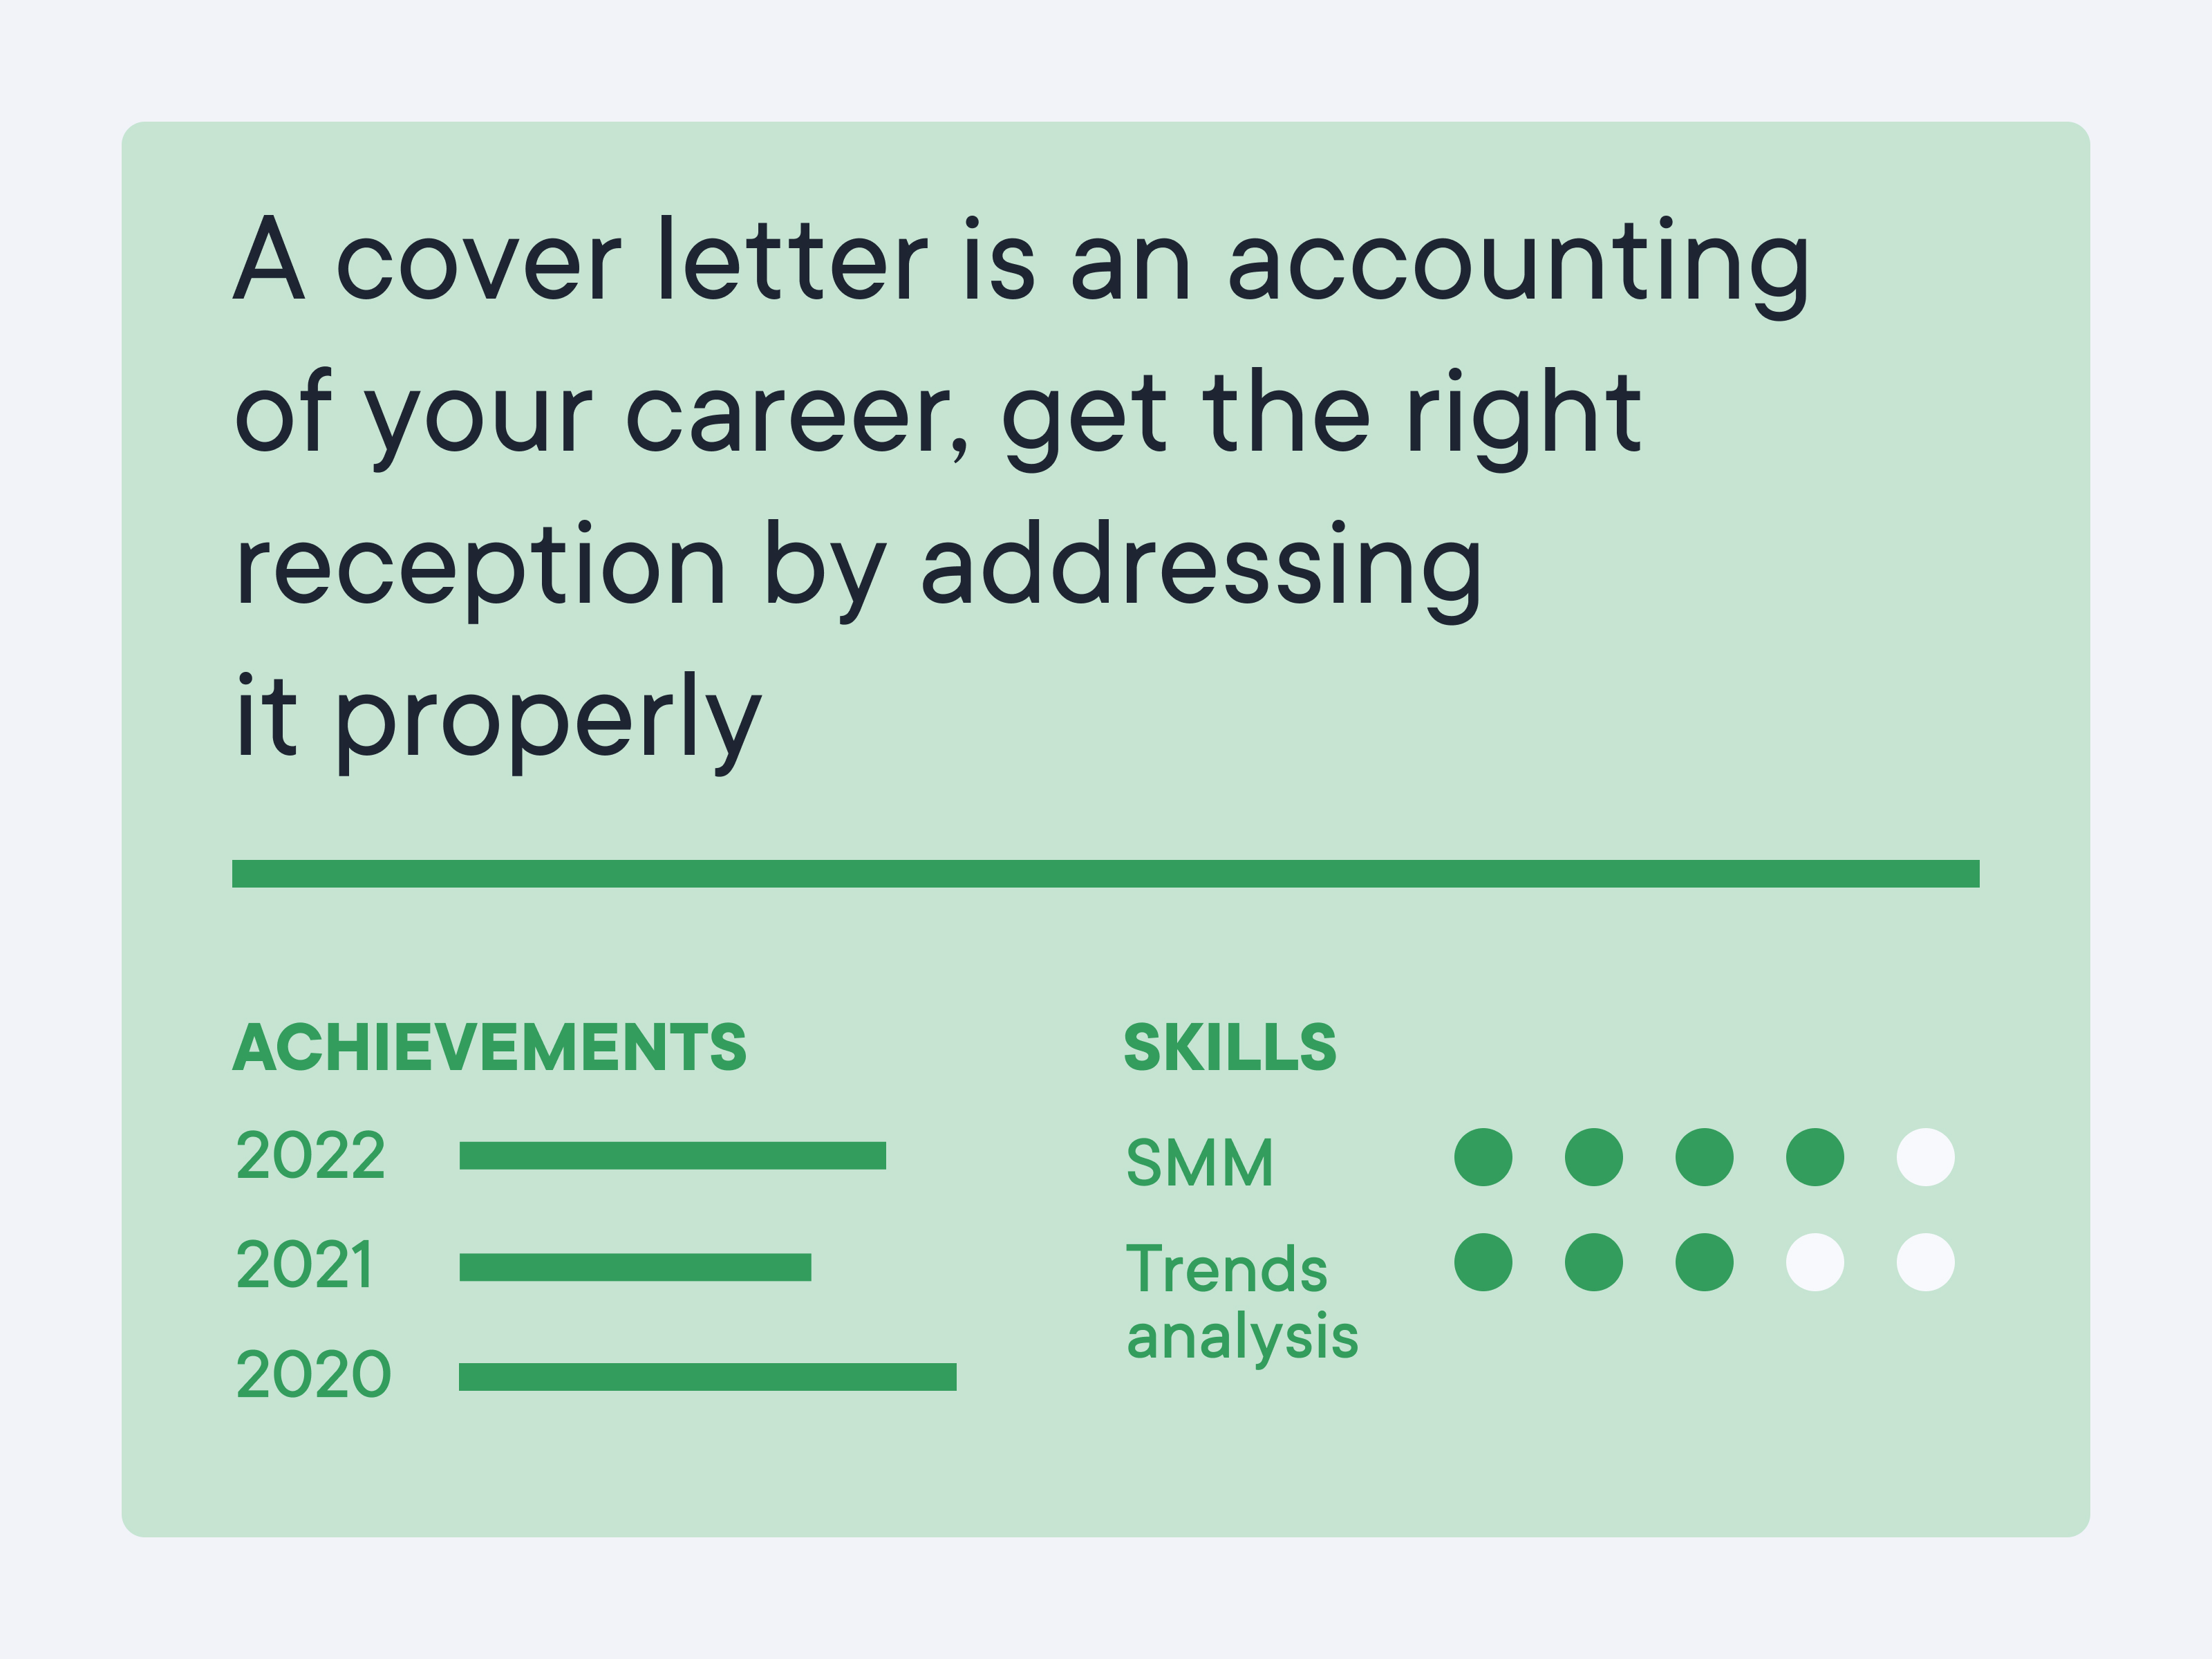 A cover letter is an accounting of your career, get the right reception by addressing it properly